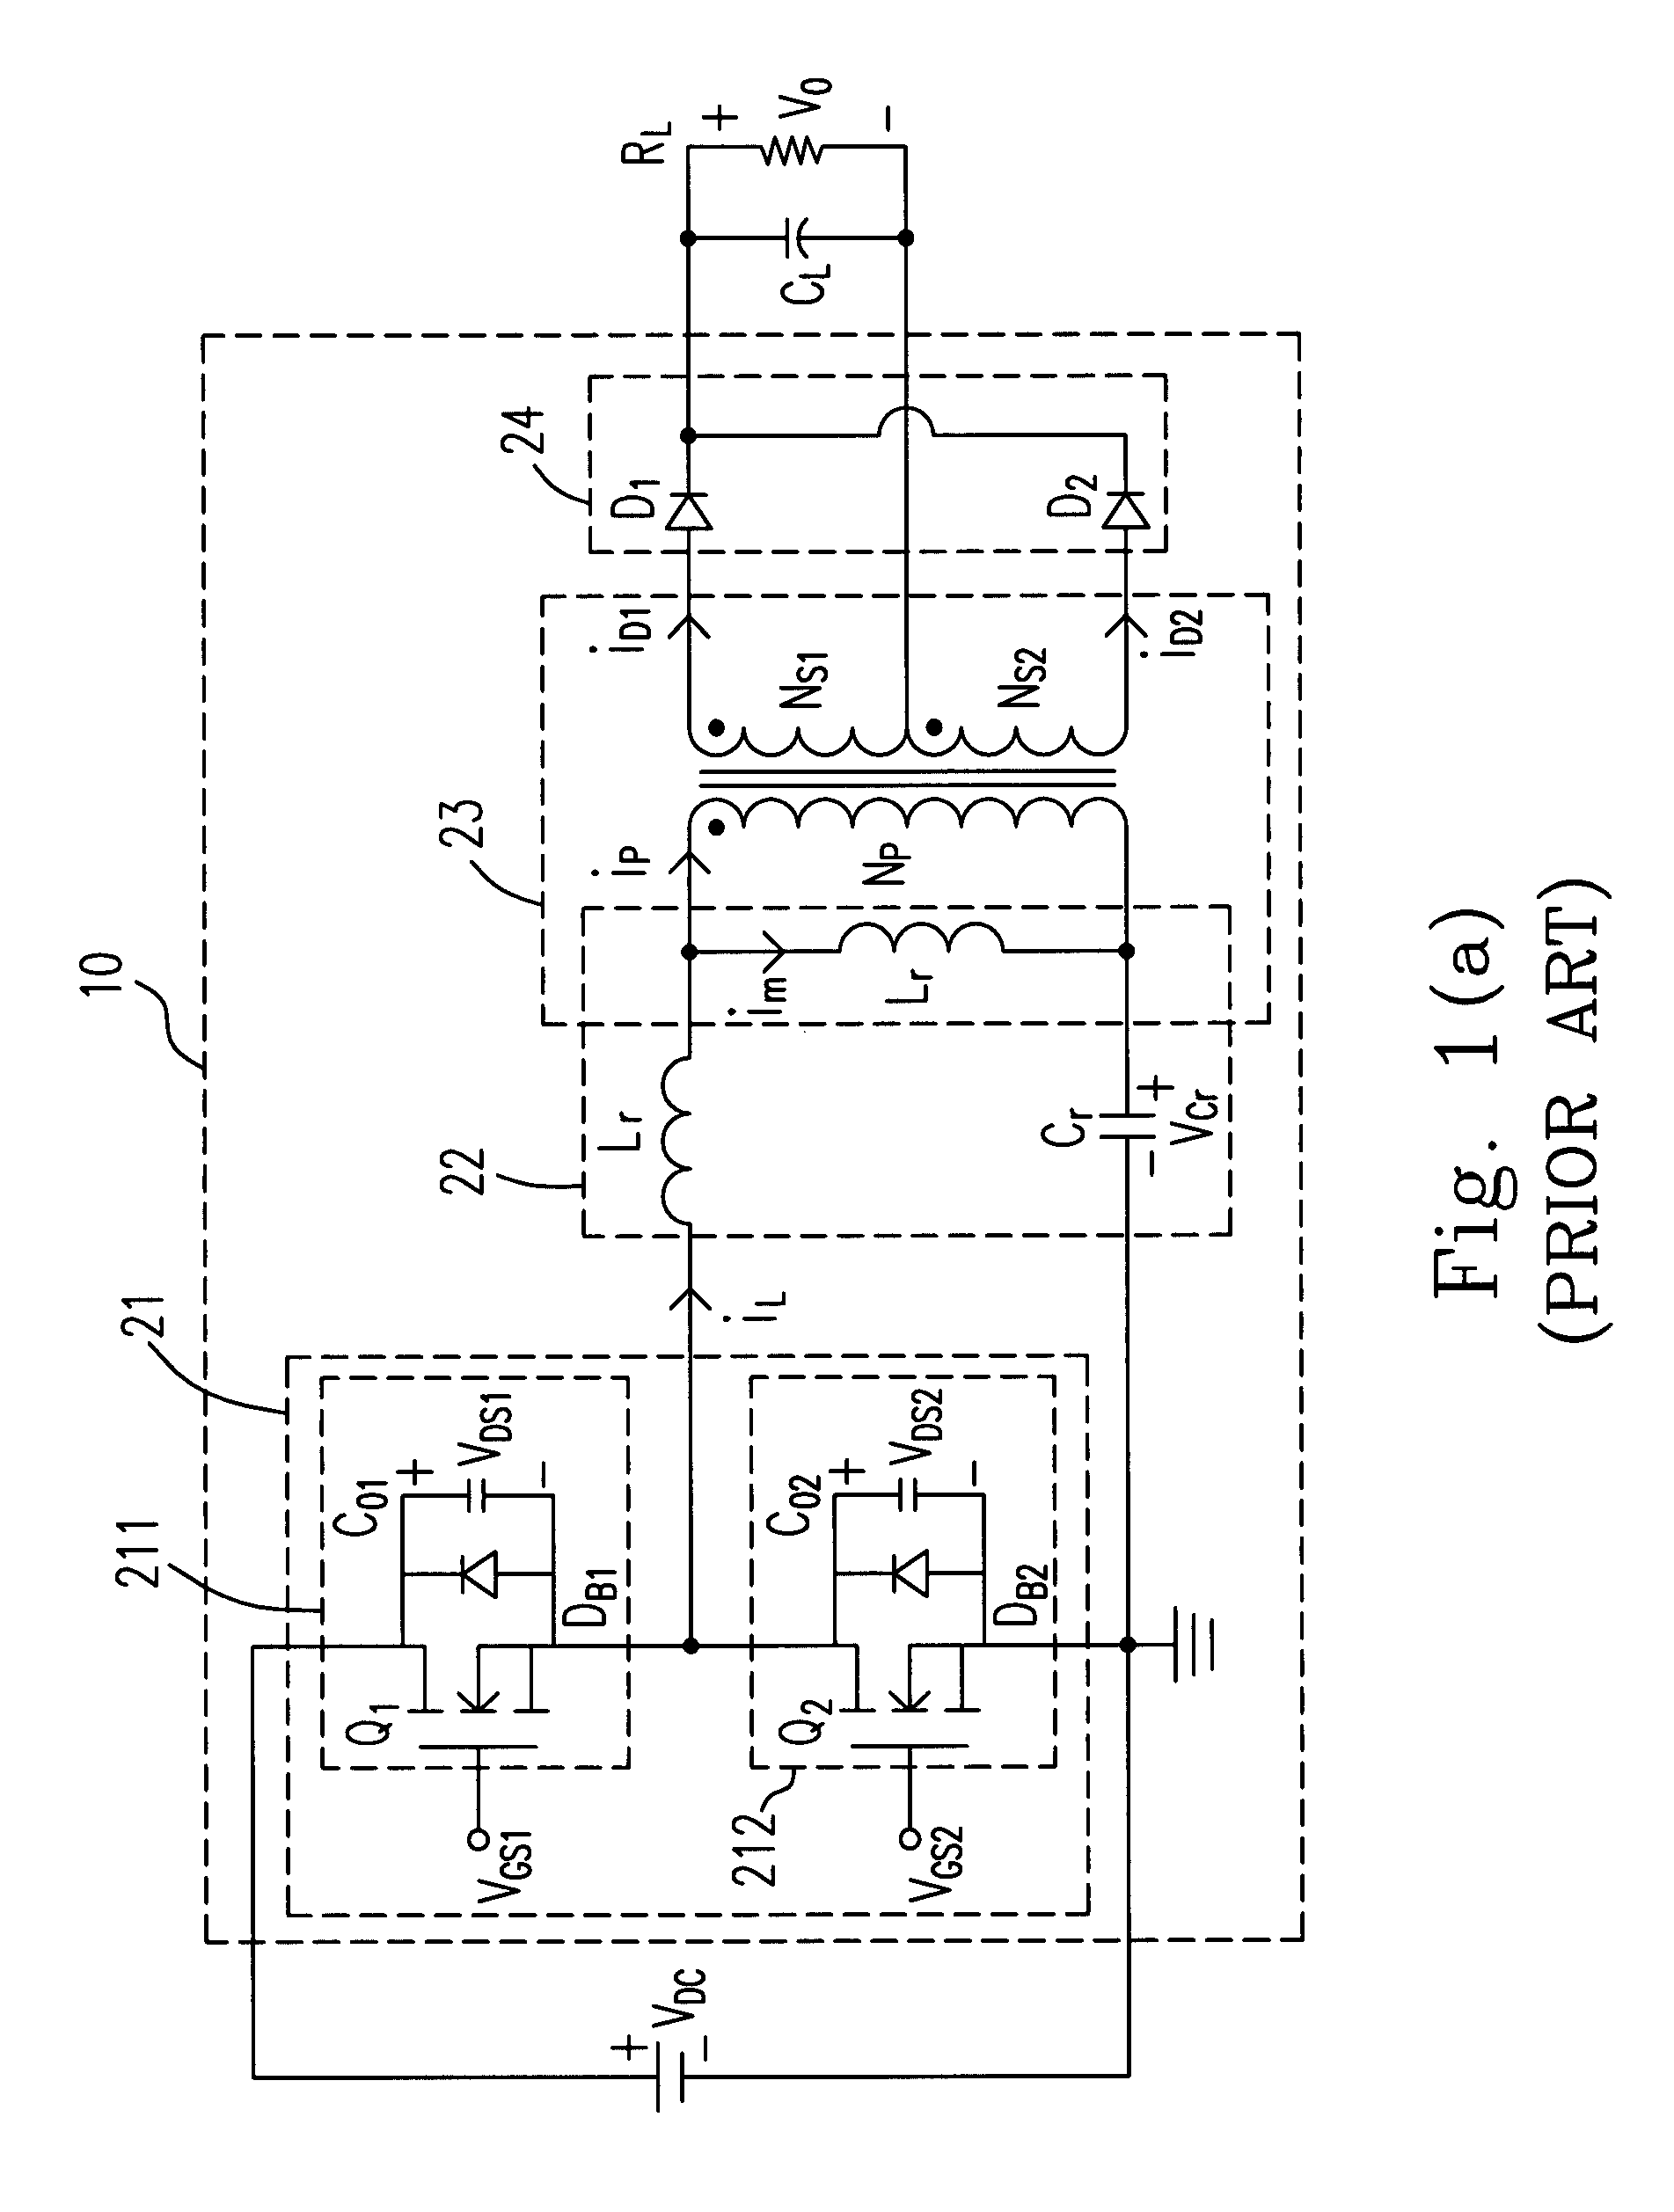 Resonant converter with synchronous rectification drive circuit